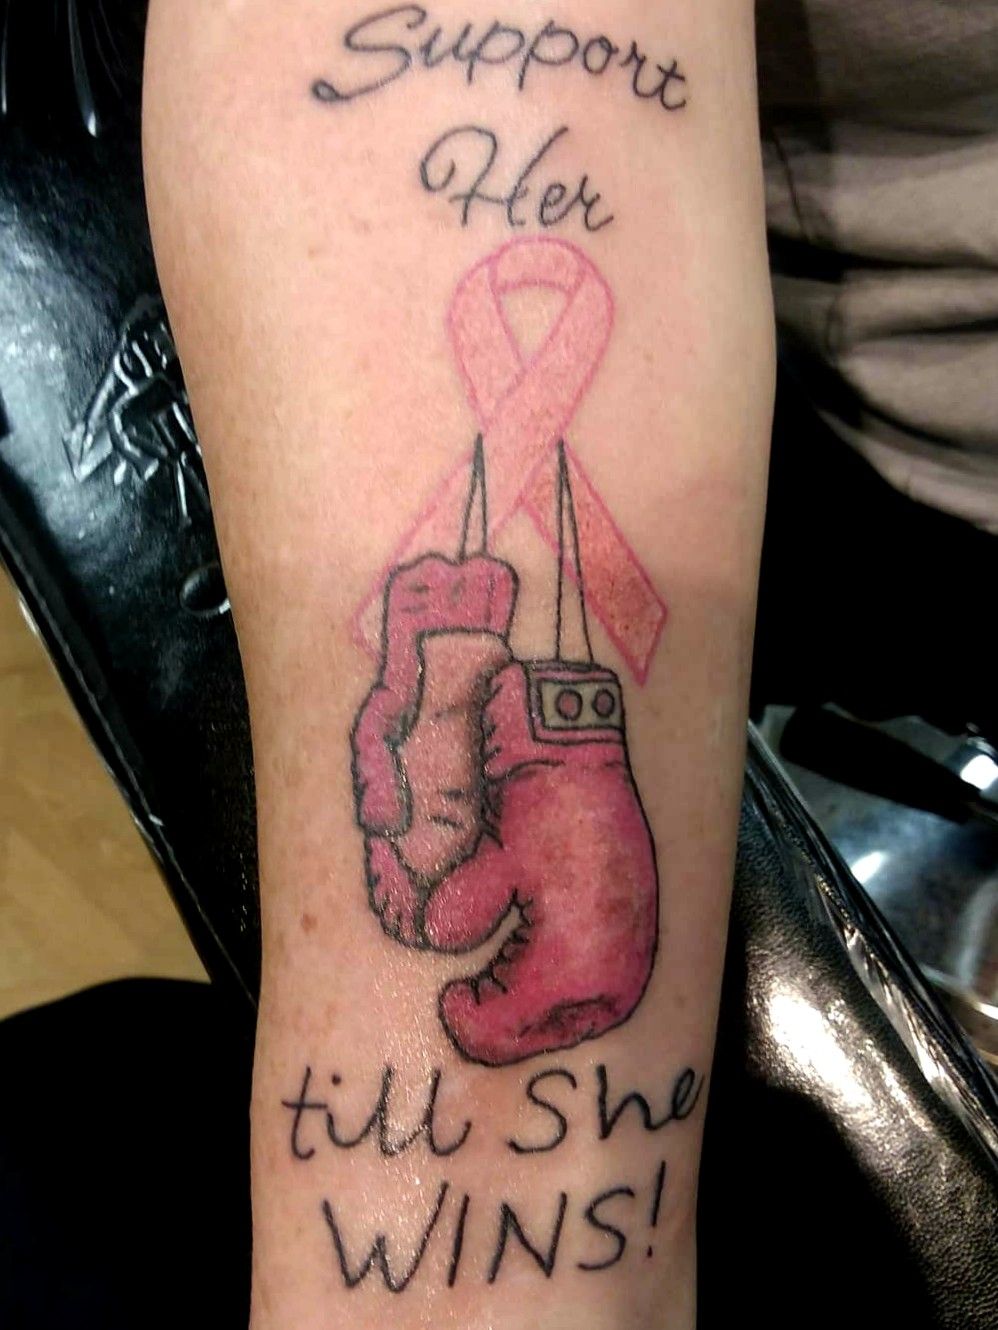 15 of the Most Amazing Tattoo Ideas For Cancer Survivors  My Care Crew Blog